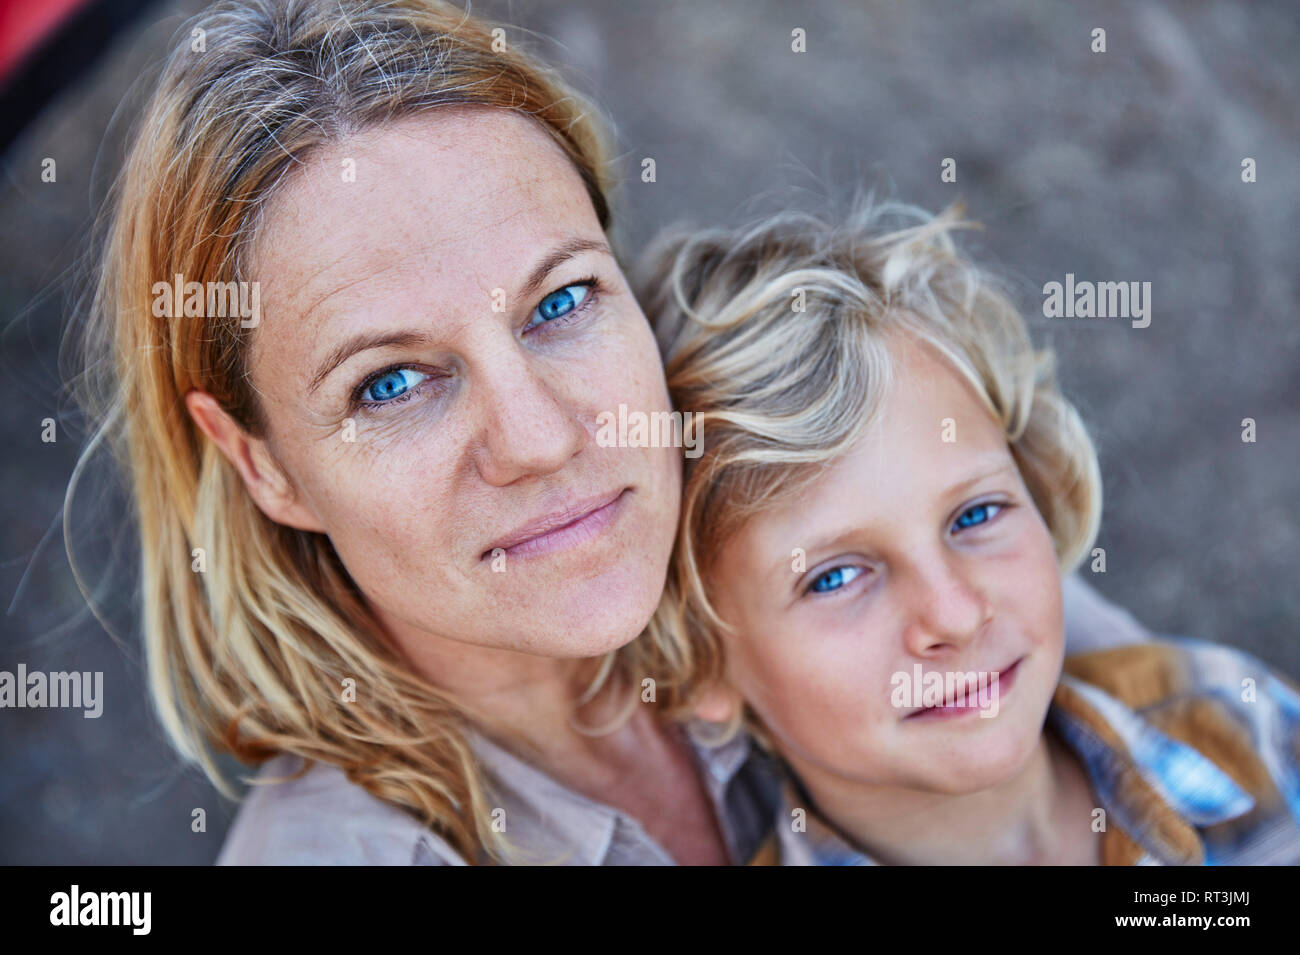 Portrait of smiling mother and daughter outdoors Banque D'Images